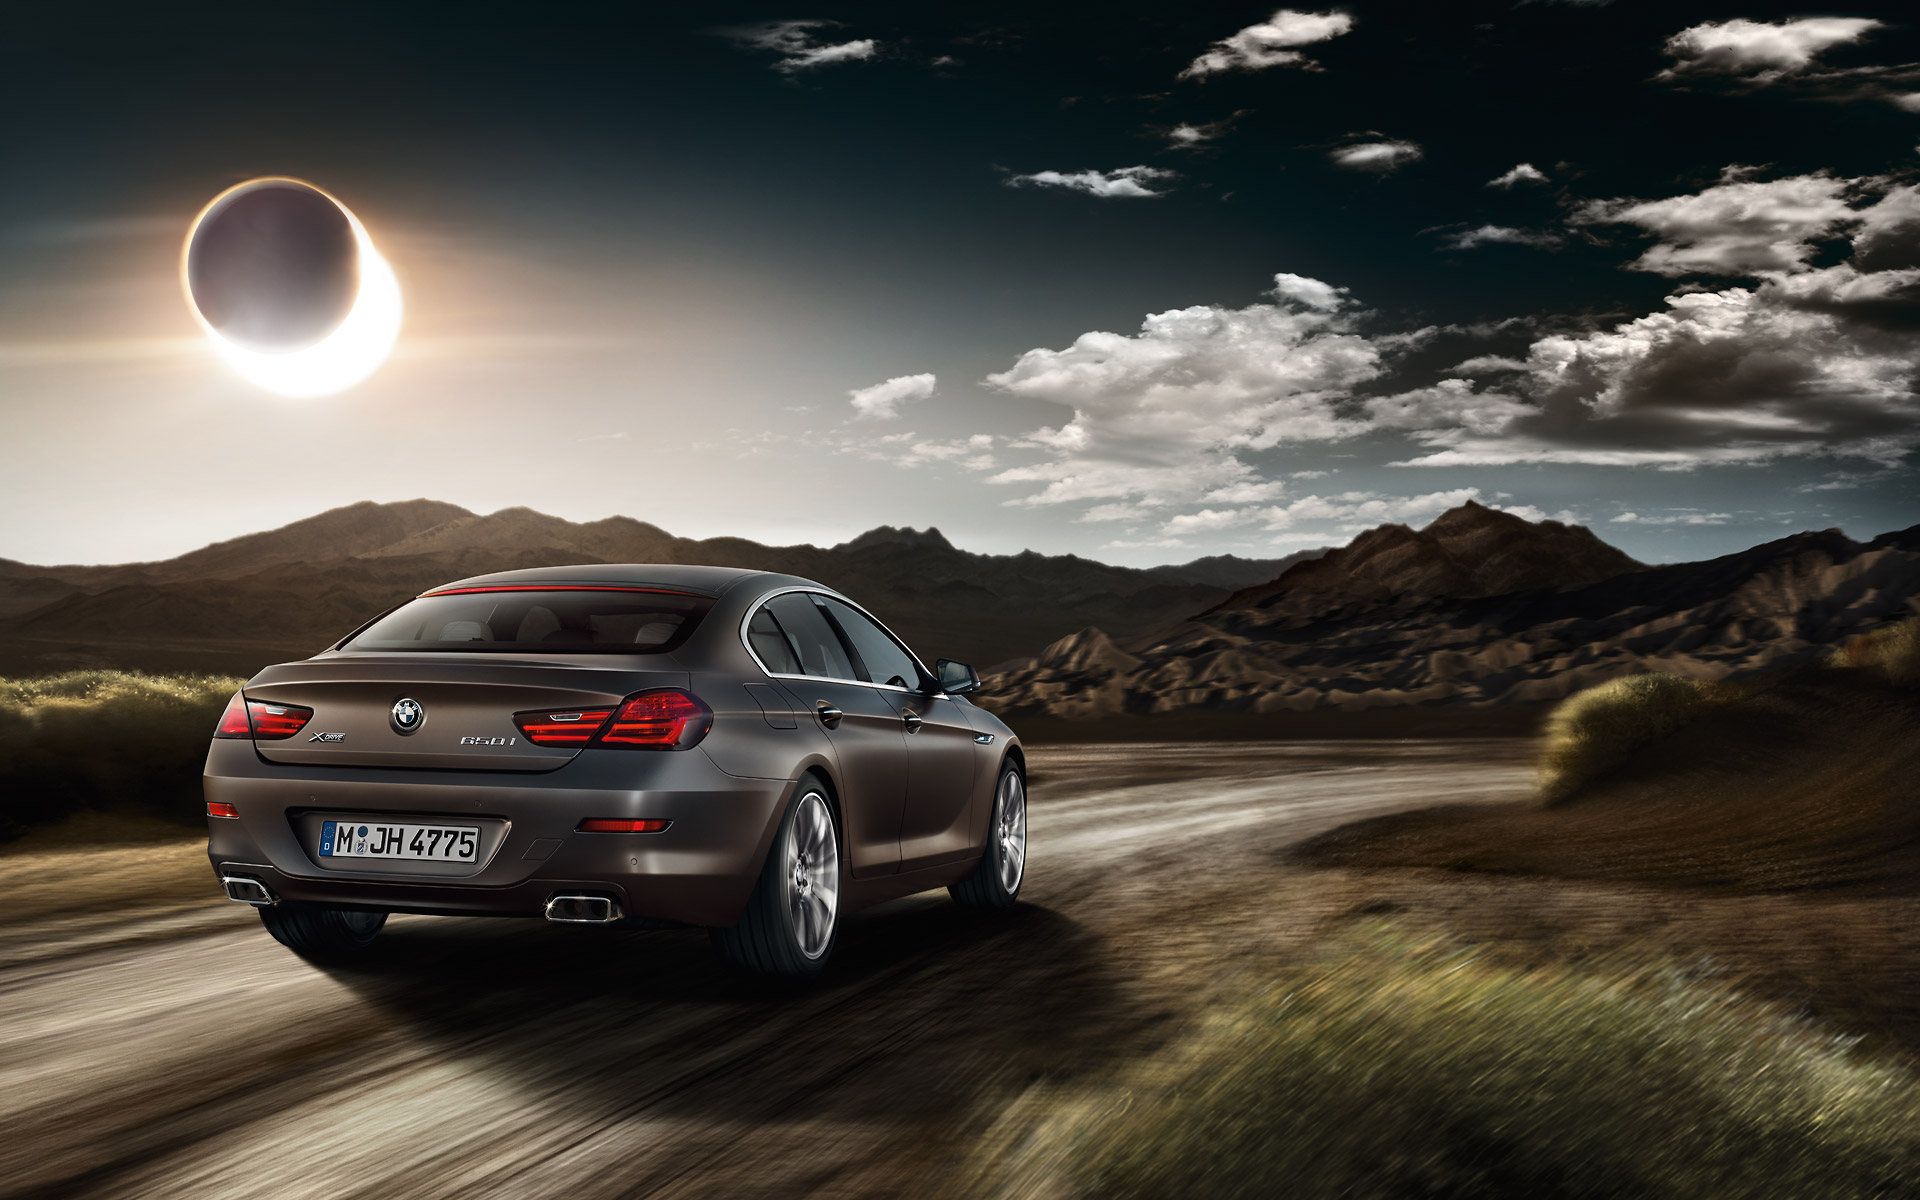 Bmw 6 Series Coupe Wallpapers